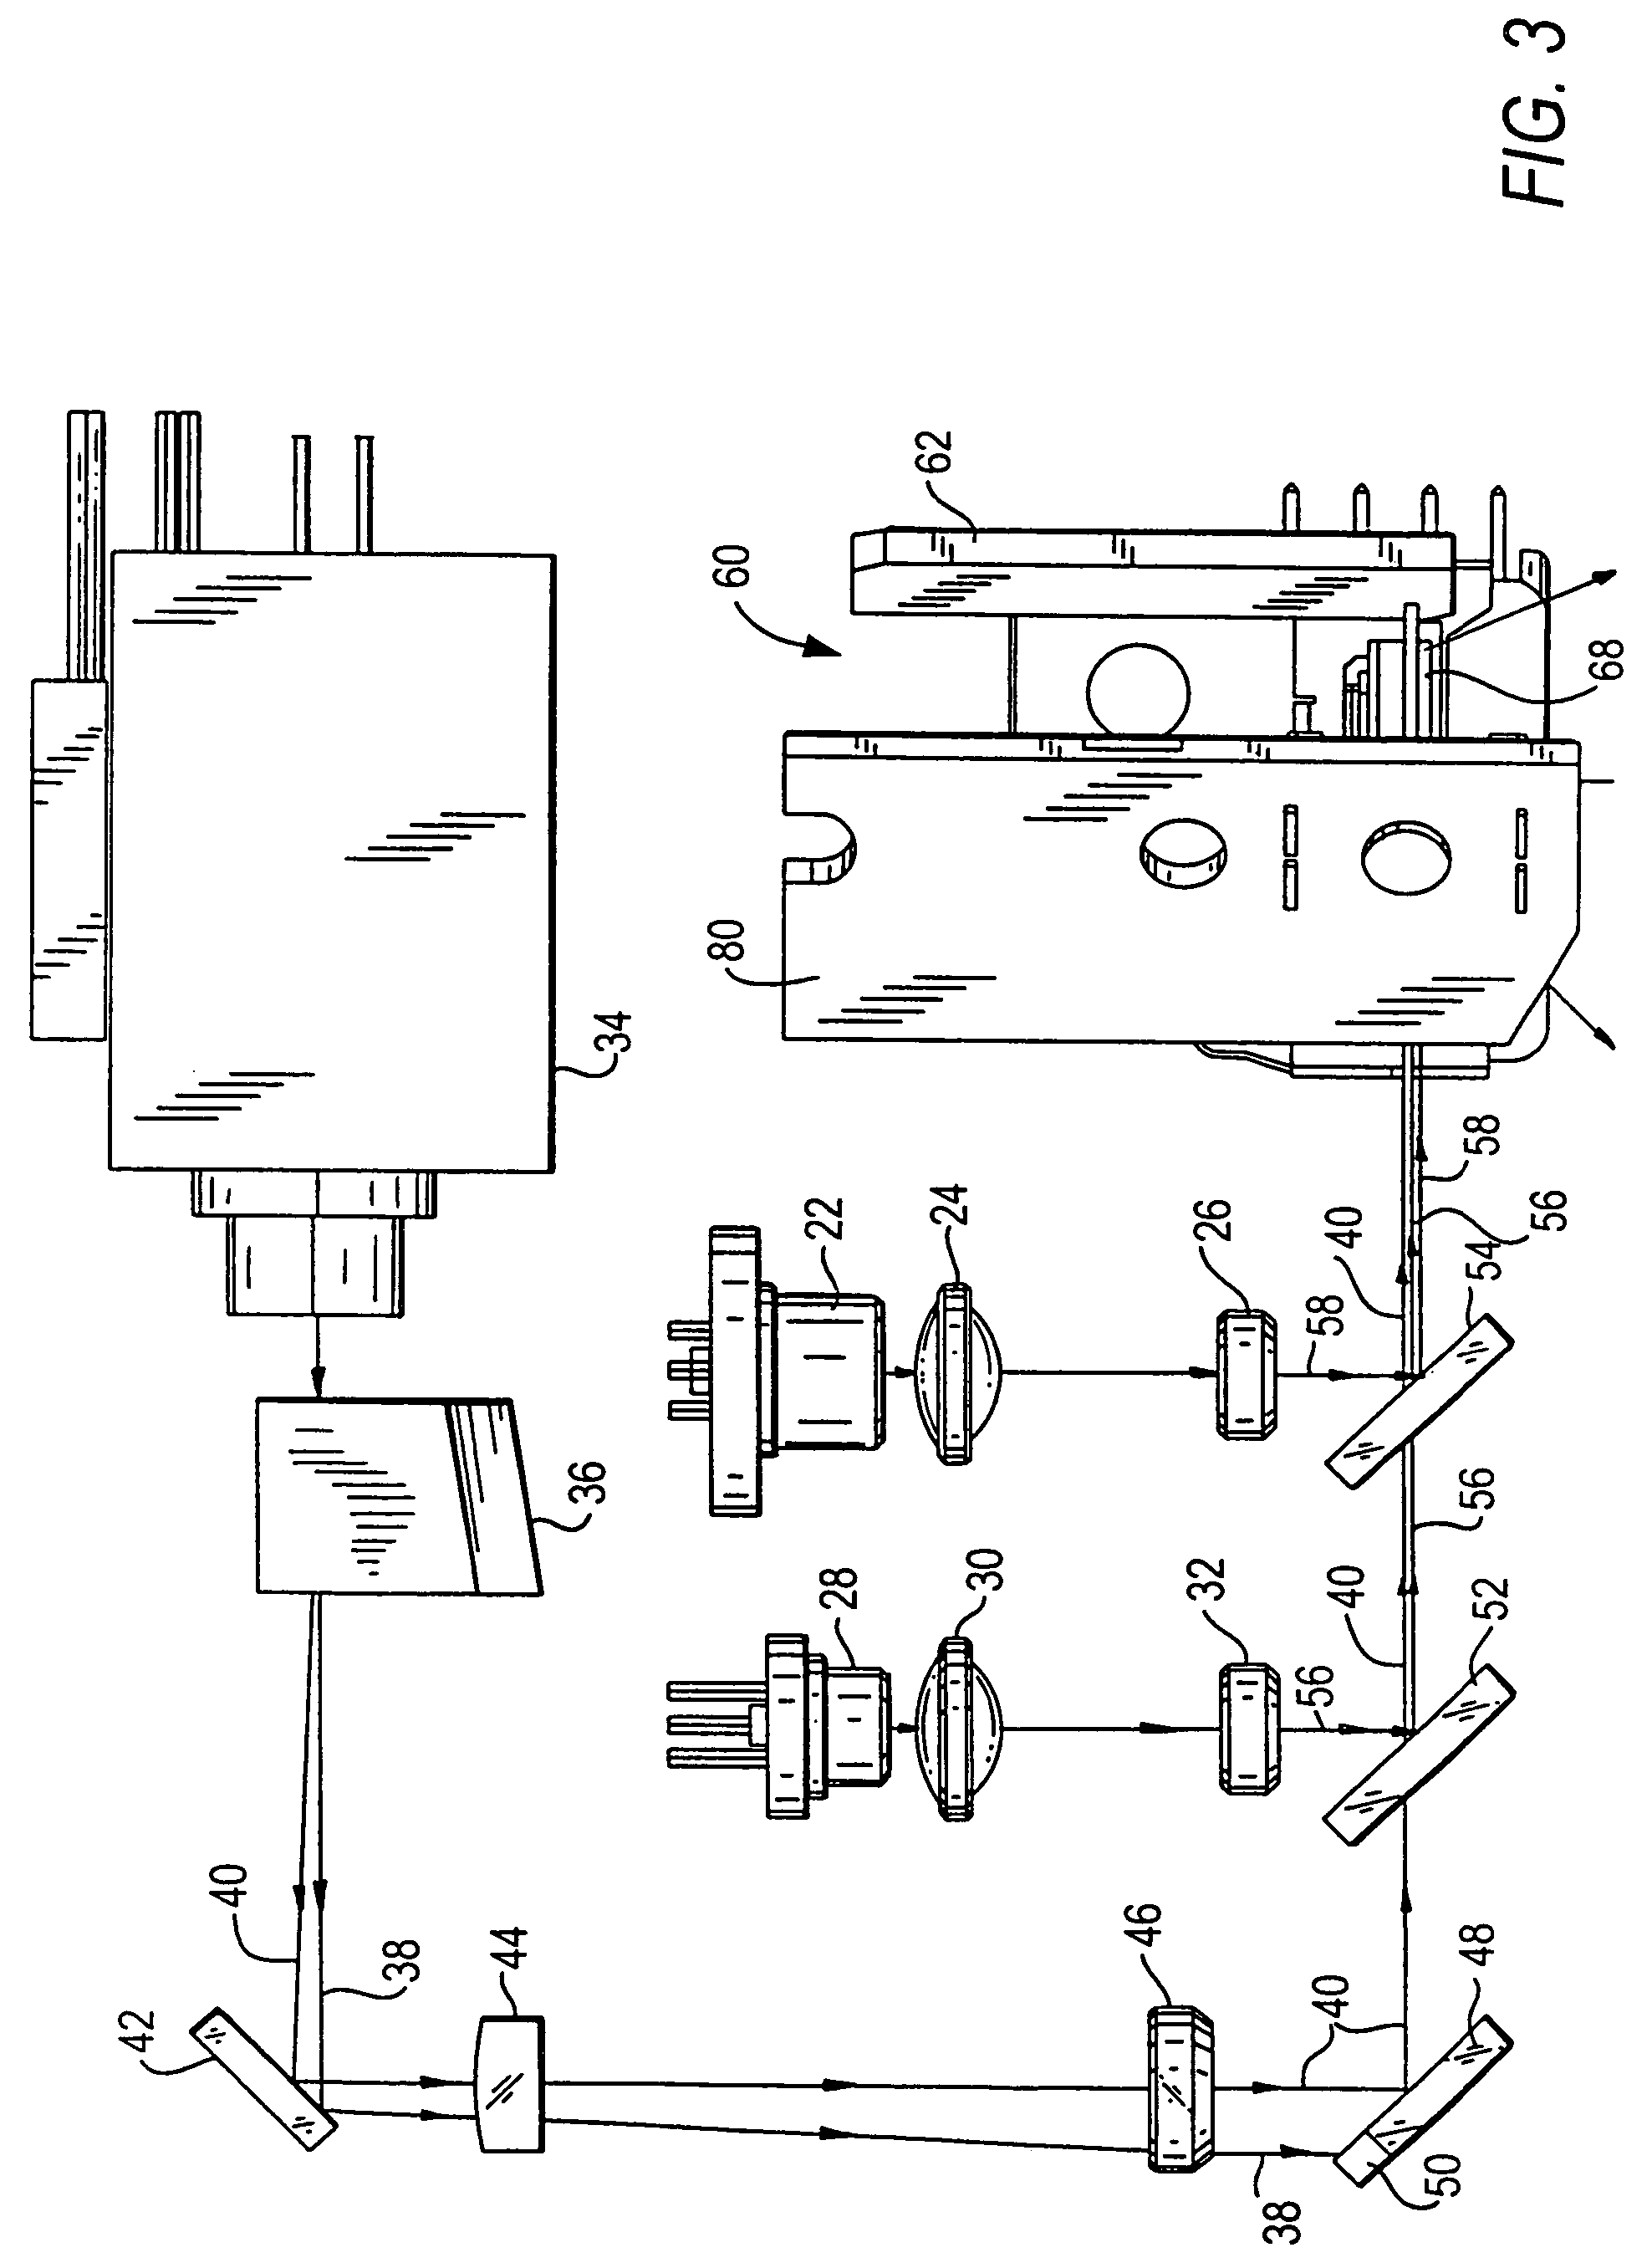 Taut, torsional flexure and a compact drive for, and method of, scanning light using the flexure